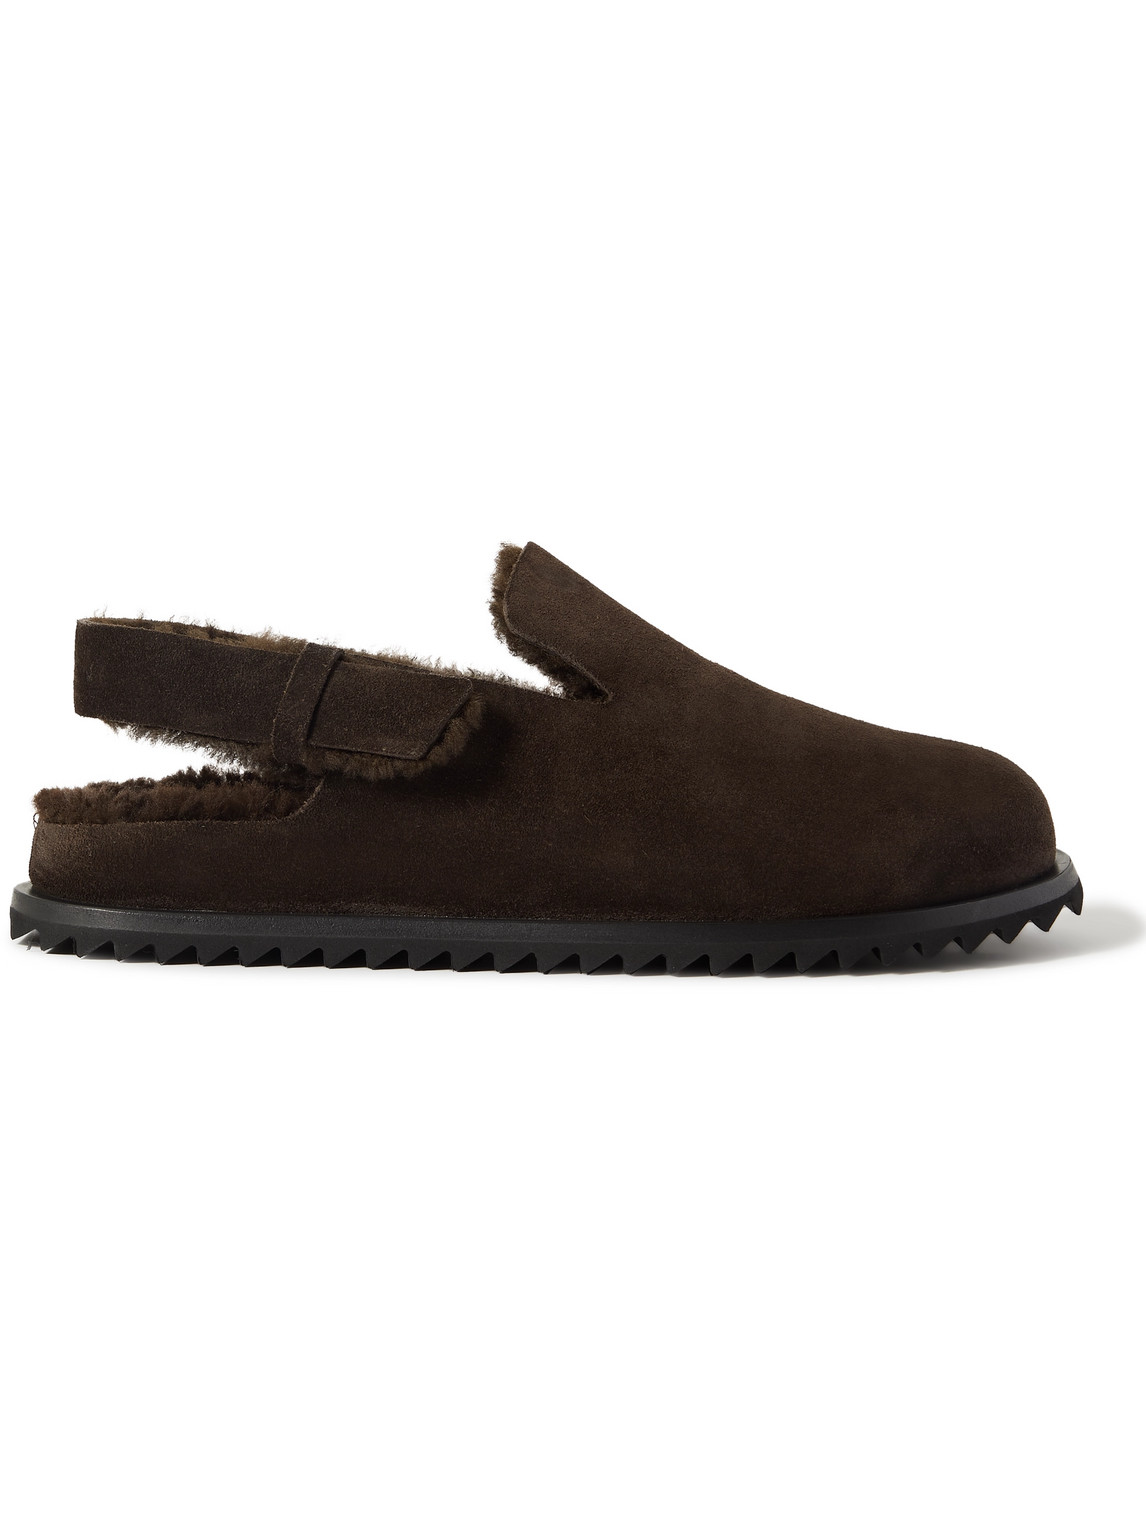 Officine Creative Introspectus Shearling-lined Suede Mules In Brown